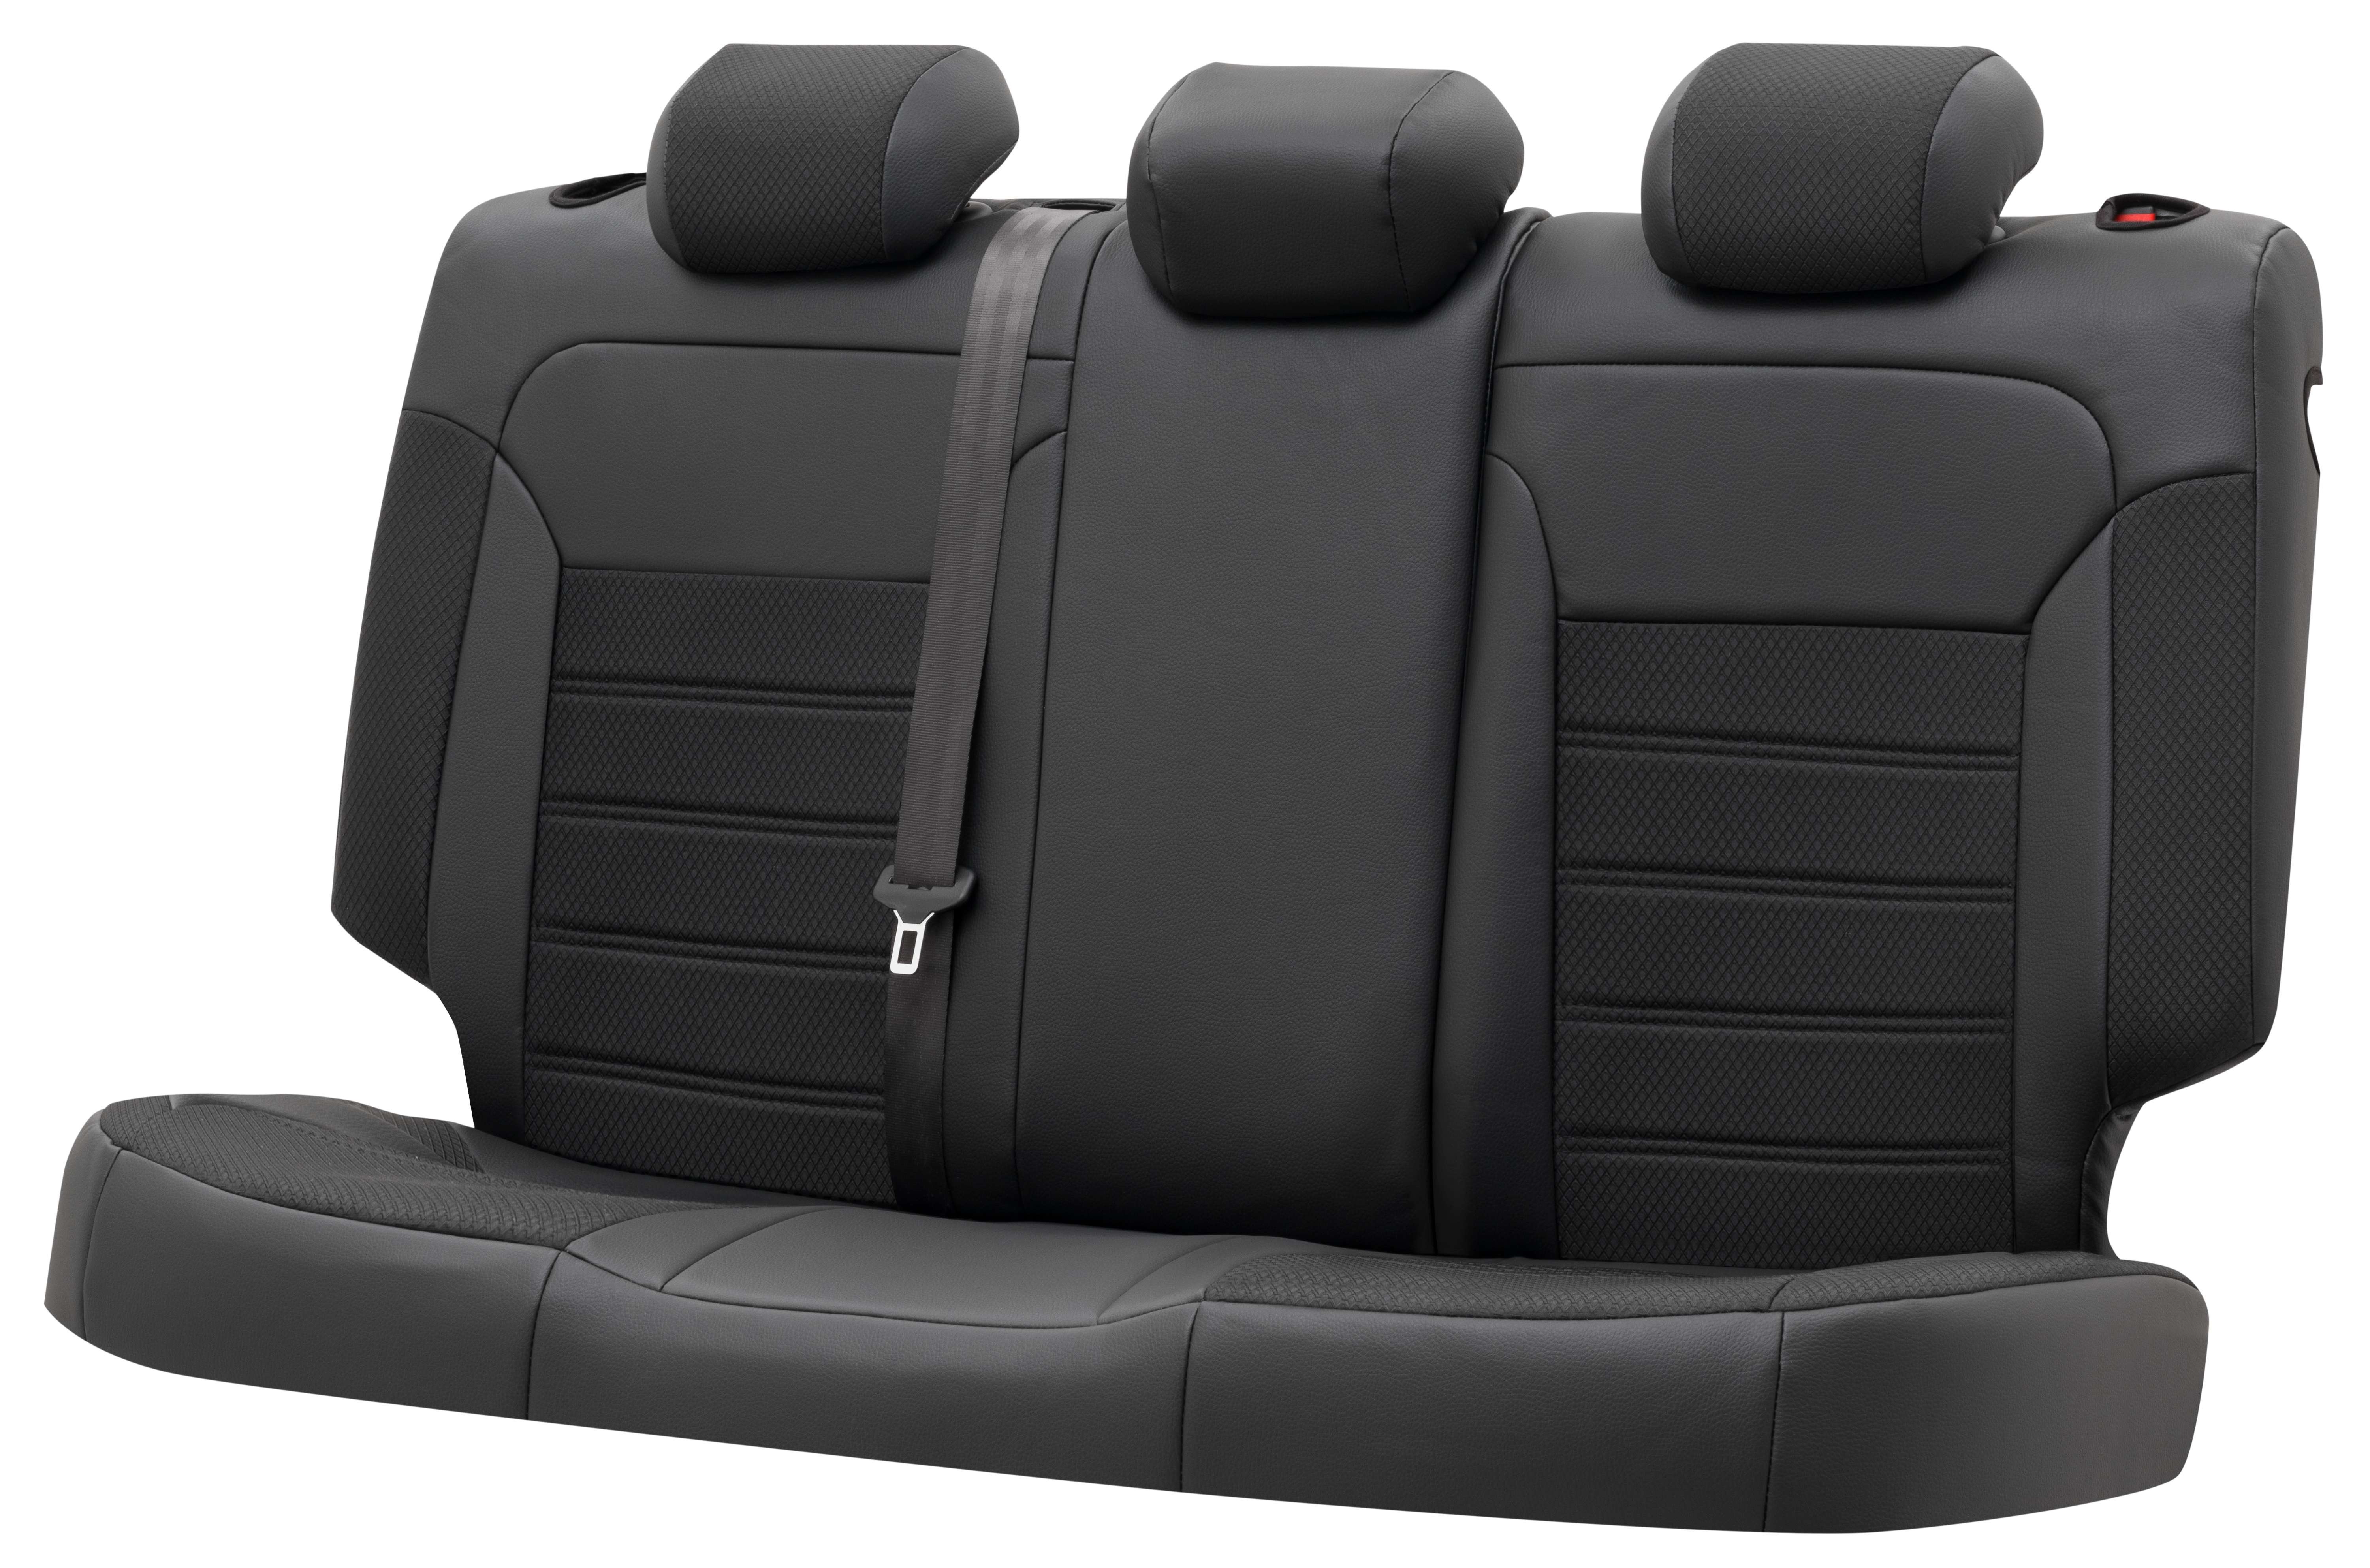 Seat Cover Aversa for VW Golf 7 Comfortline model 2013-Today, 1 rear seat cover for sports seats